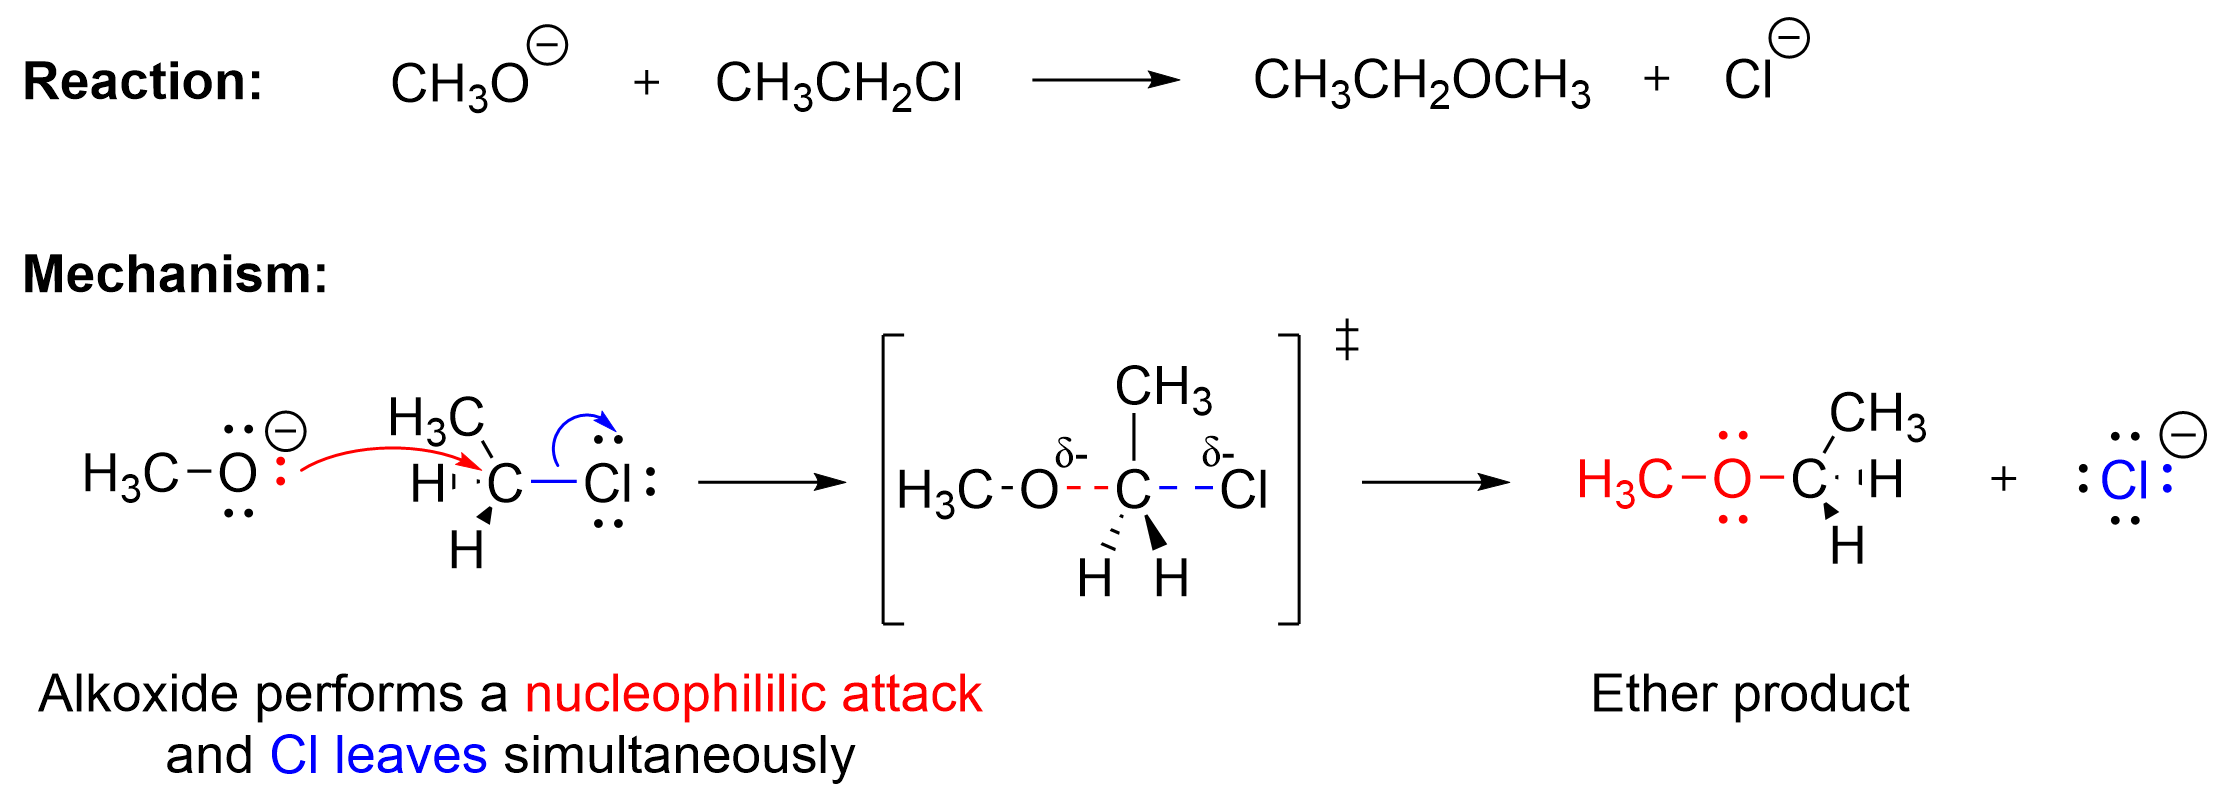 The reaction between methoxide (CH3O-) and ethylchloride (CH3CH2Cl) to form methoxy-ethane and chloride (Cl-). The mechanism shows a lone pair on the O of methoxide on the tail end of an arrow connecting via the arrowhead to C of the ethylchloride, specifically the carbon bonded to the Cl. A smaller curved arrow with its tail starting from the bond between C and Cl points its head towards the Cl. Below, it’s labelled “alkoxide performs a nucleophilic attack and Cl leaves simultaneously”. A horizontal arrow to the right shows the transition state in square brackets where the C is partially connected to the O of the methoxide and the Cl, both containing delta negative symbols above, represented with dotted lines as bonds. Another arrow to the right shows the final products: the ether product methoxy-ethane and a chloride (Cl-).